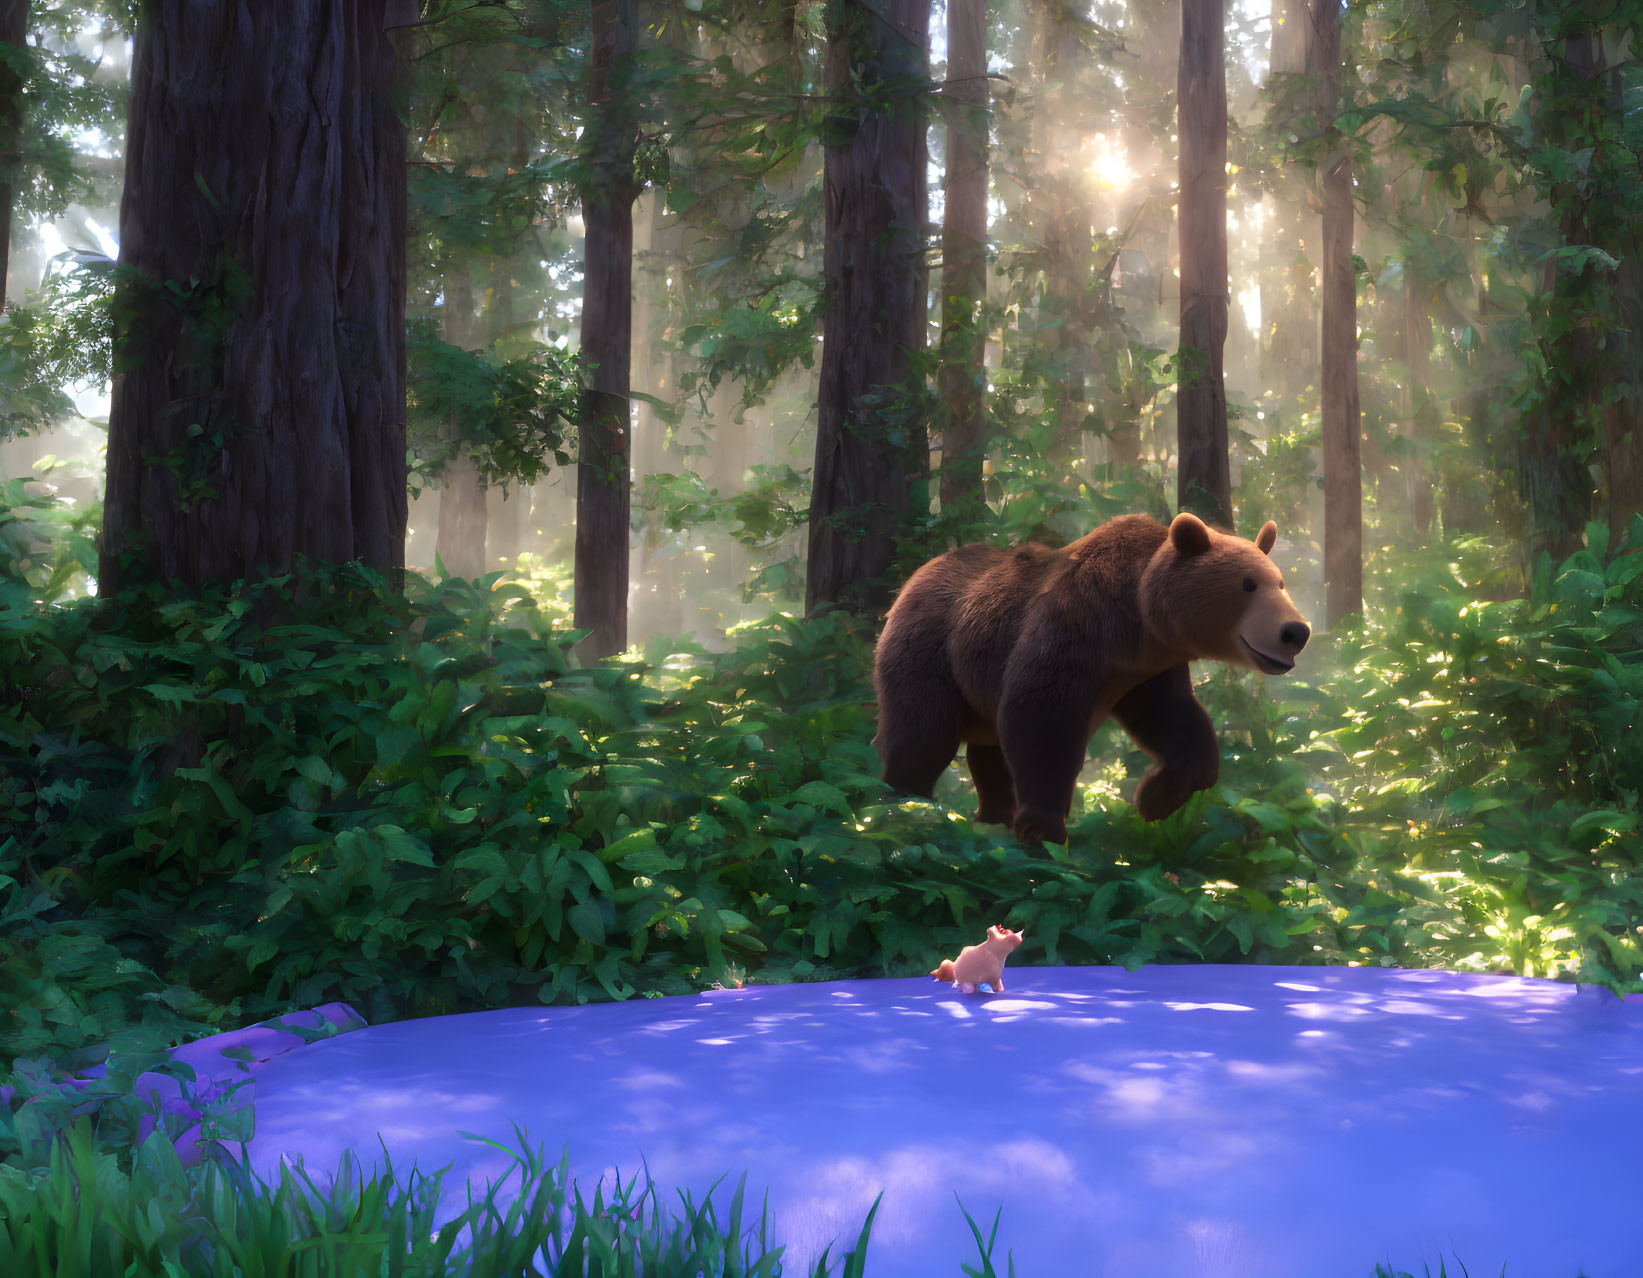 Bear and piglet by sunlit forest pond